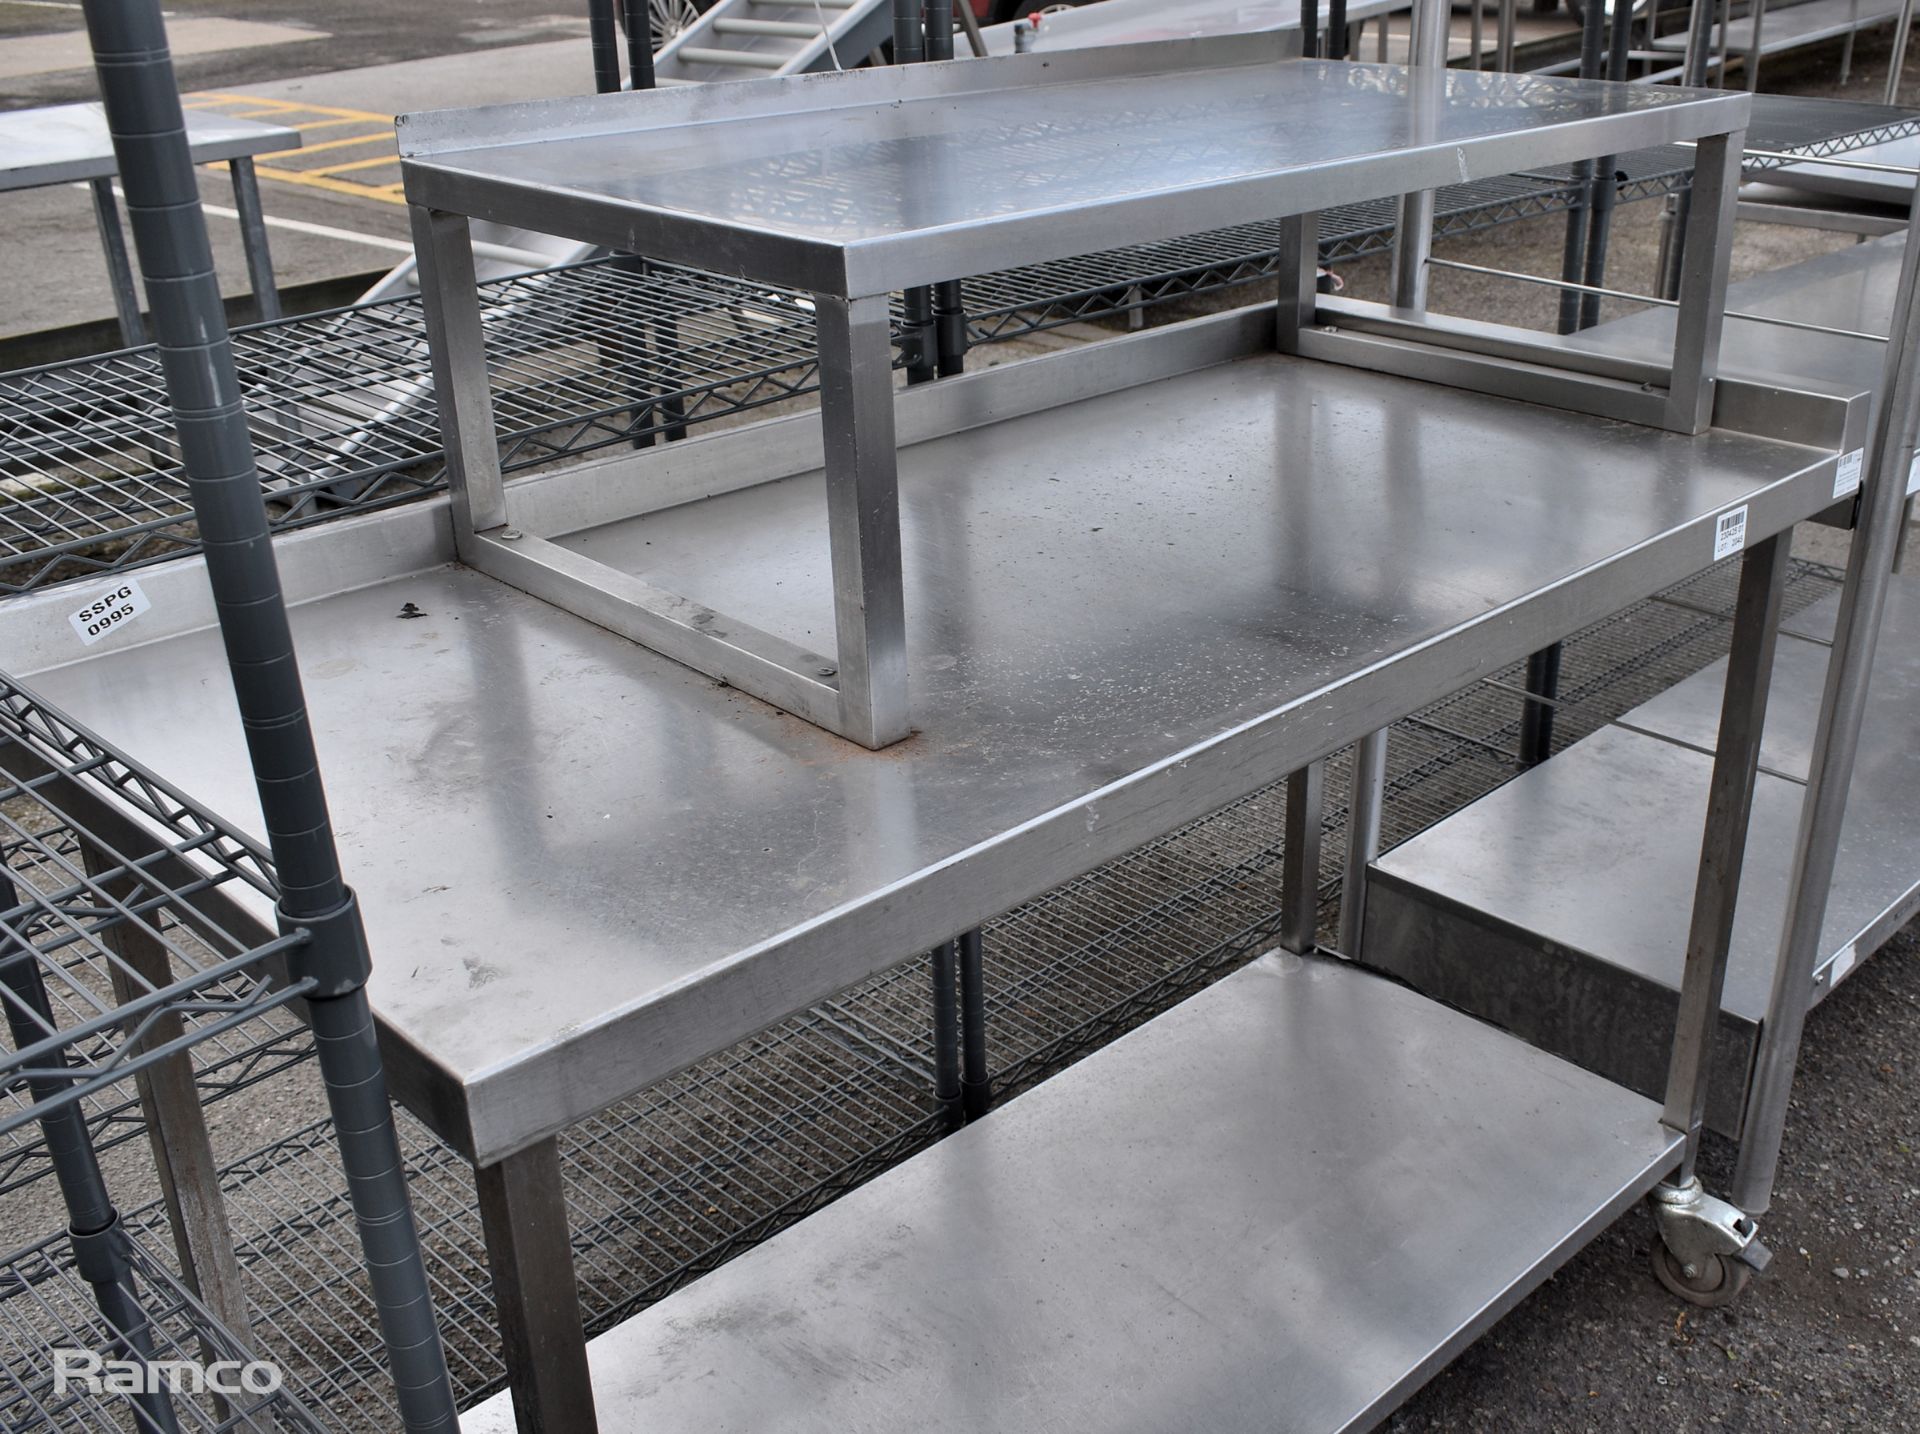 Stainless steel table with upstand and top and bottom - dimensions: 140 x 65 x 125cm - Image 3 of 4